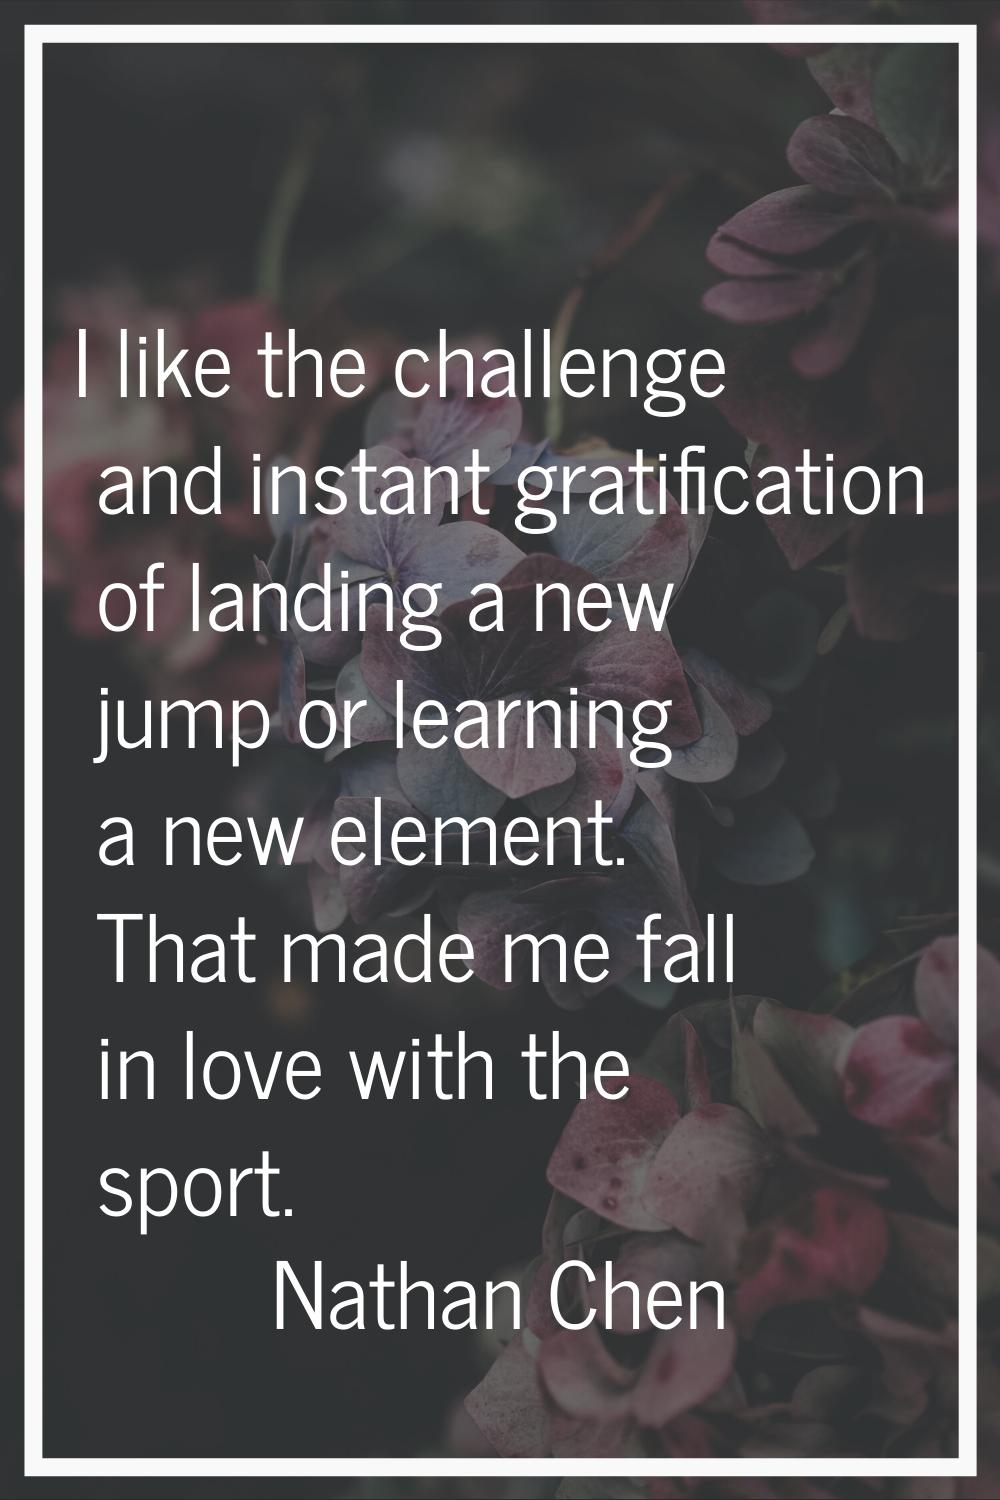 I like the challenge and instant gratification of landing a new jump or learning a new element. Tha